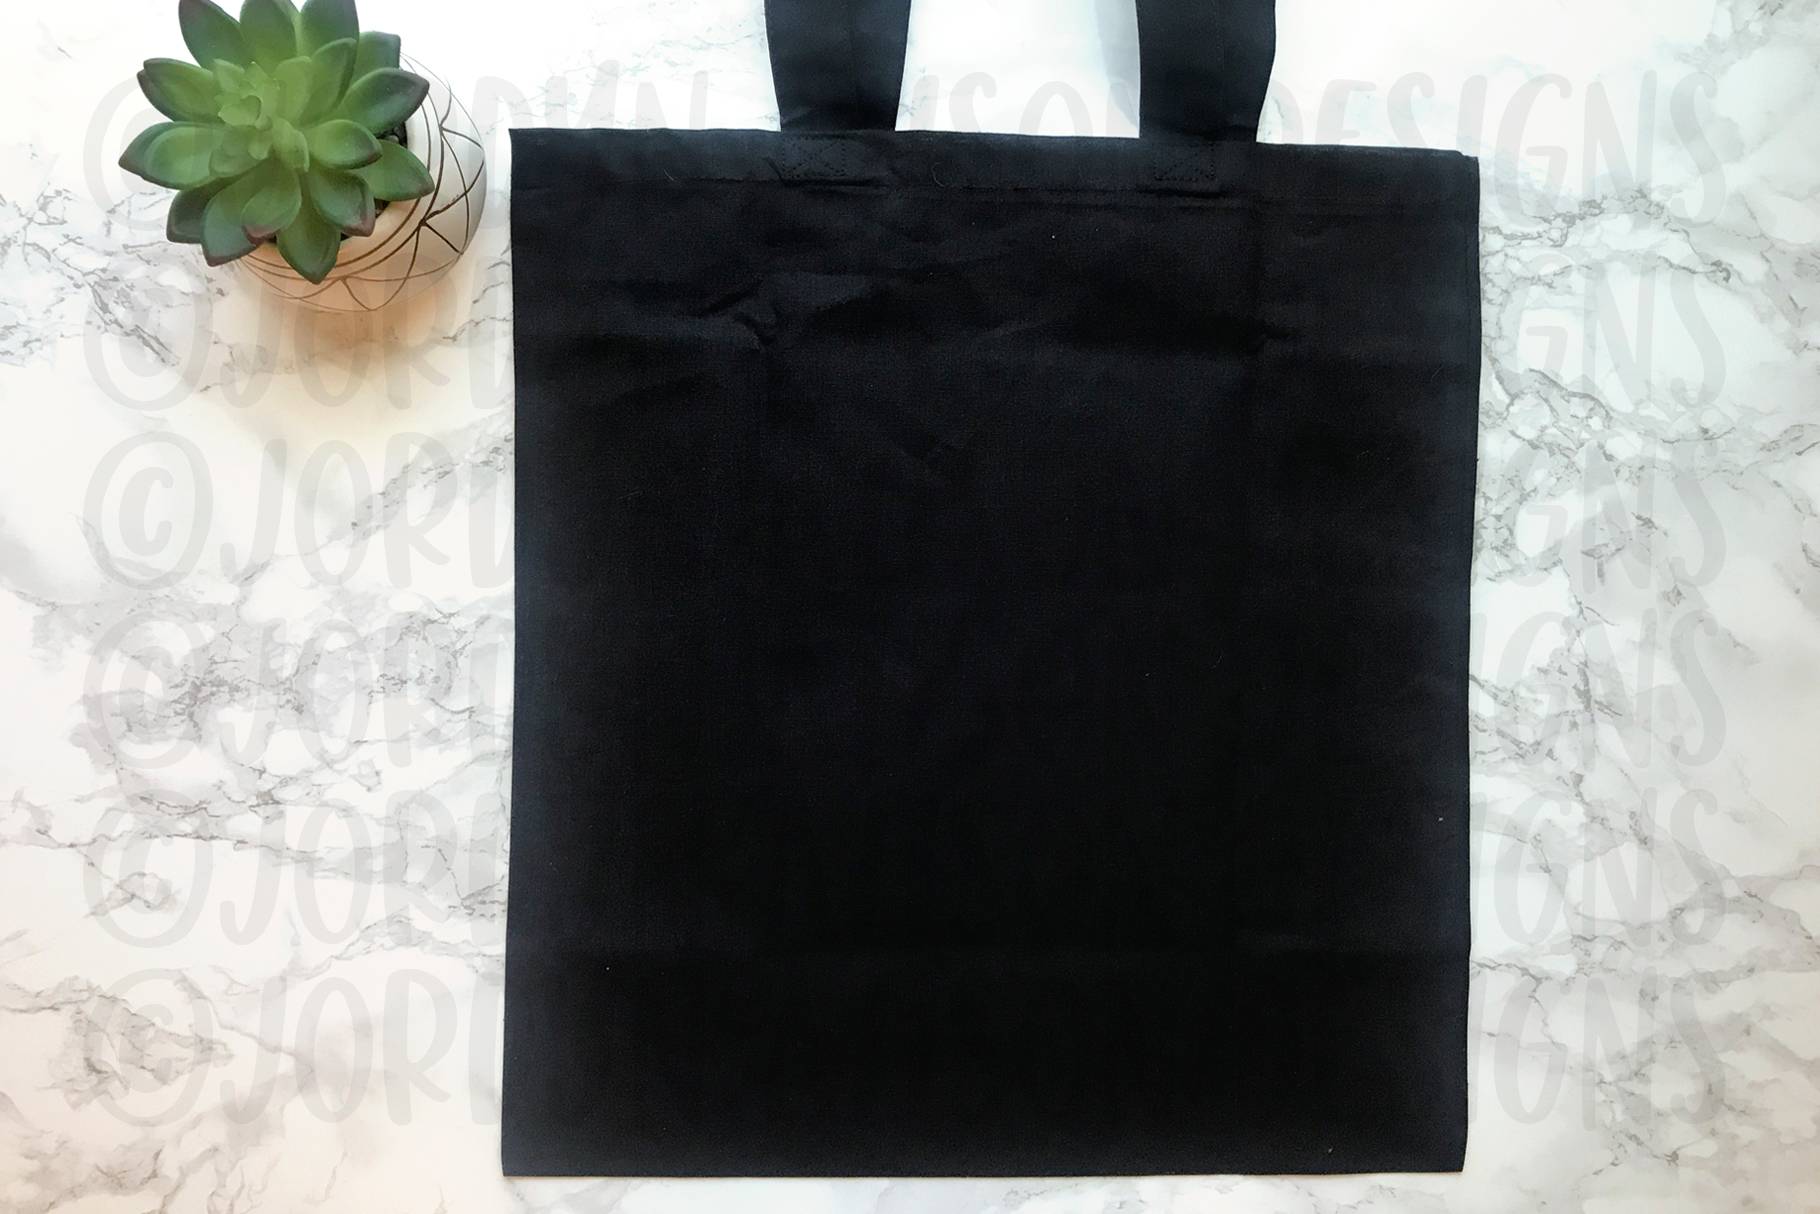 Black Tote Bag Mock Up With A Succulent